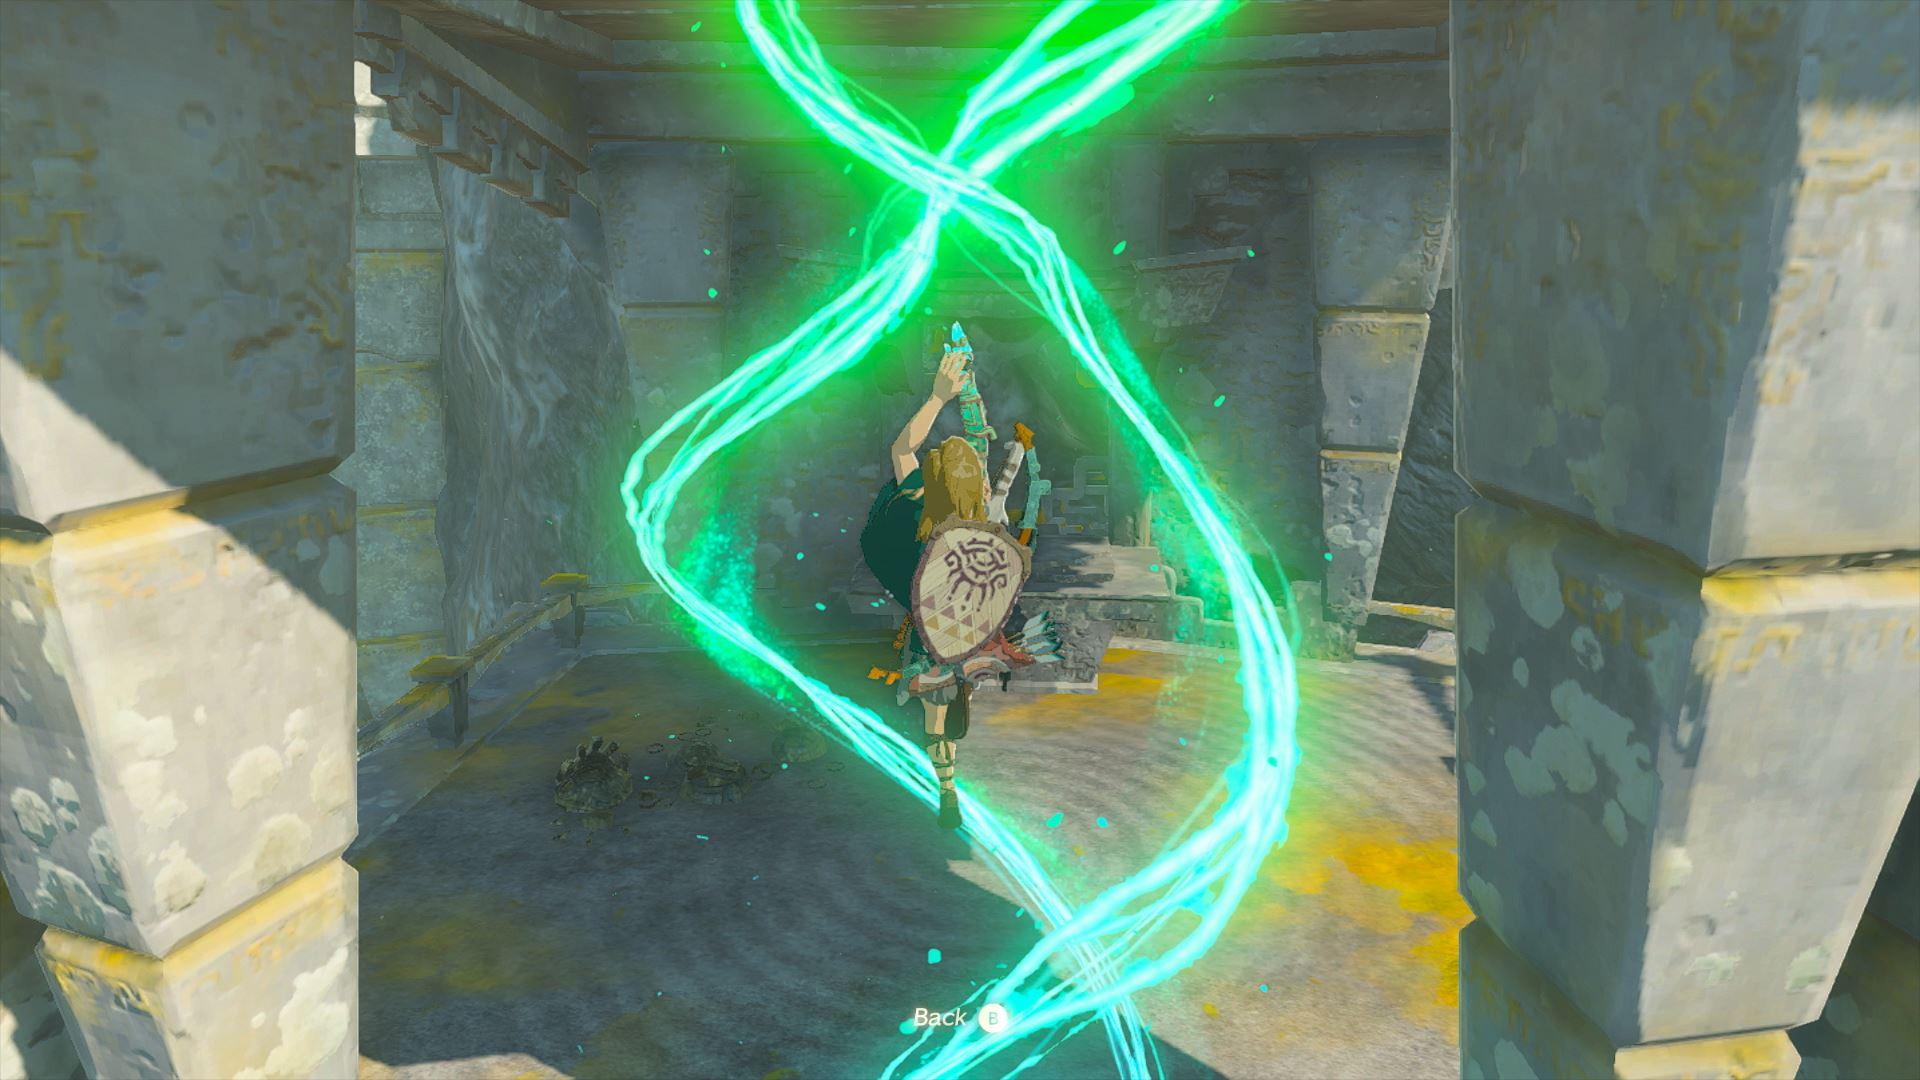 Link using Ascend in 'Tears of the Kingdom'